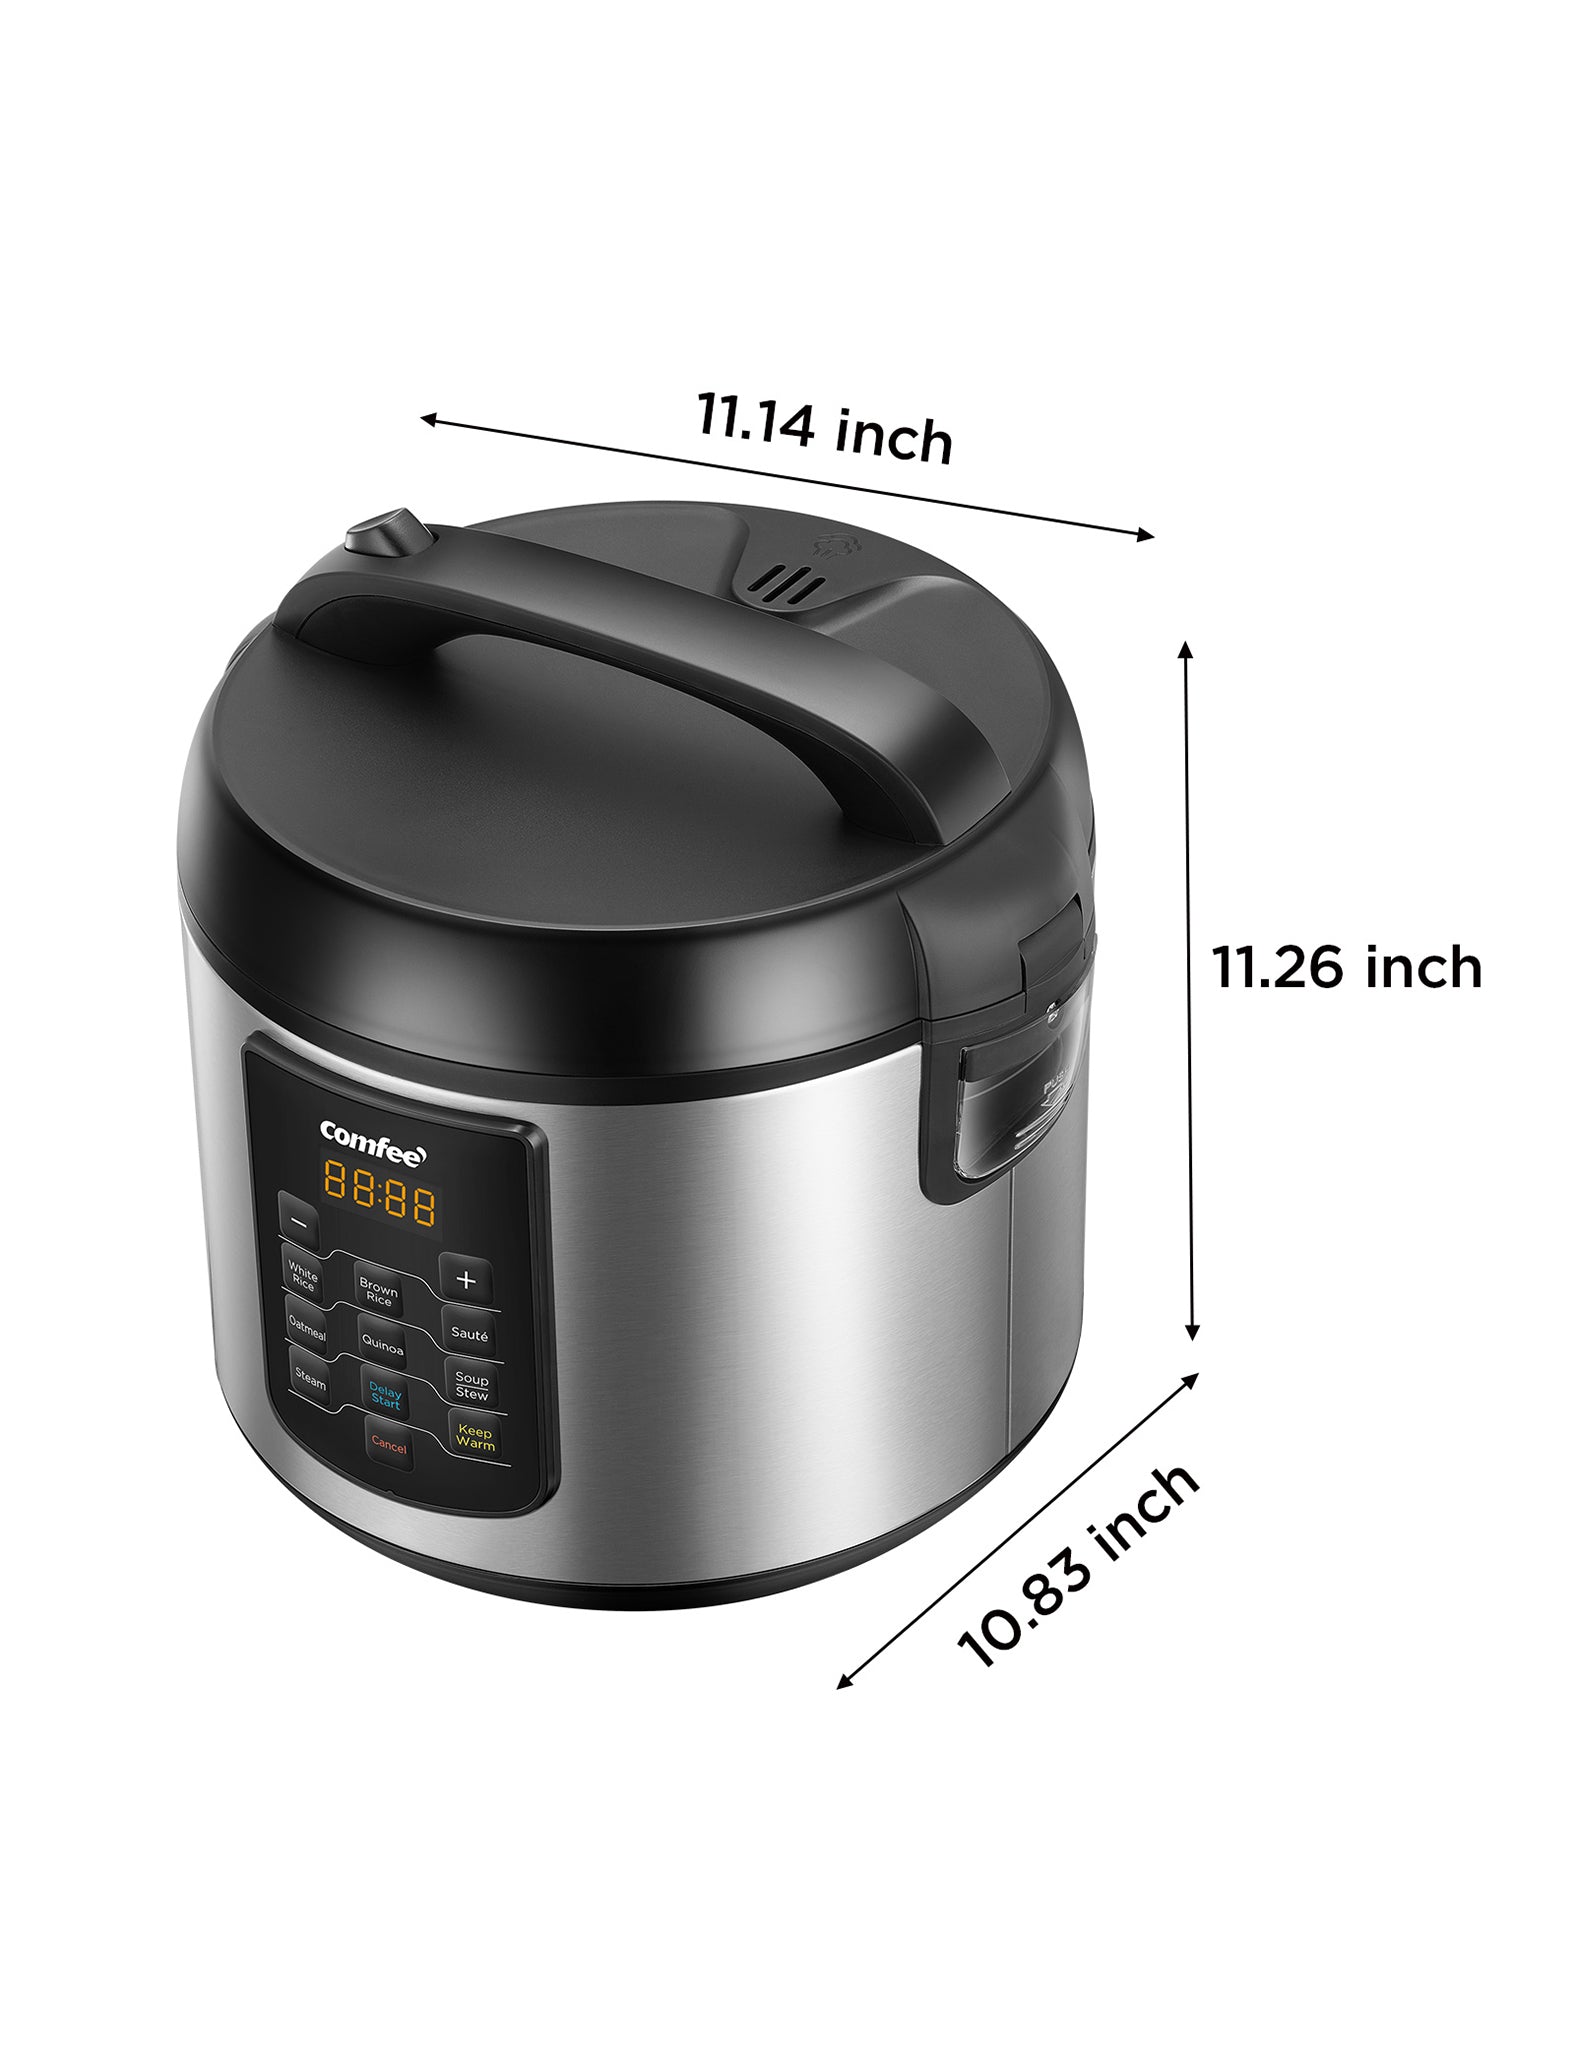 SPT 3-Cup Rice Cooker & Steamer - Stainless Steel - 540 ml